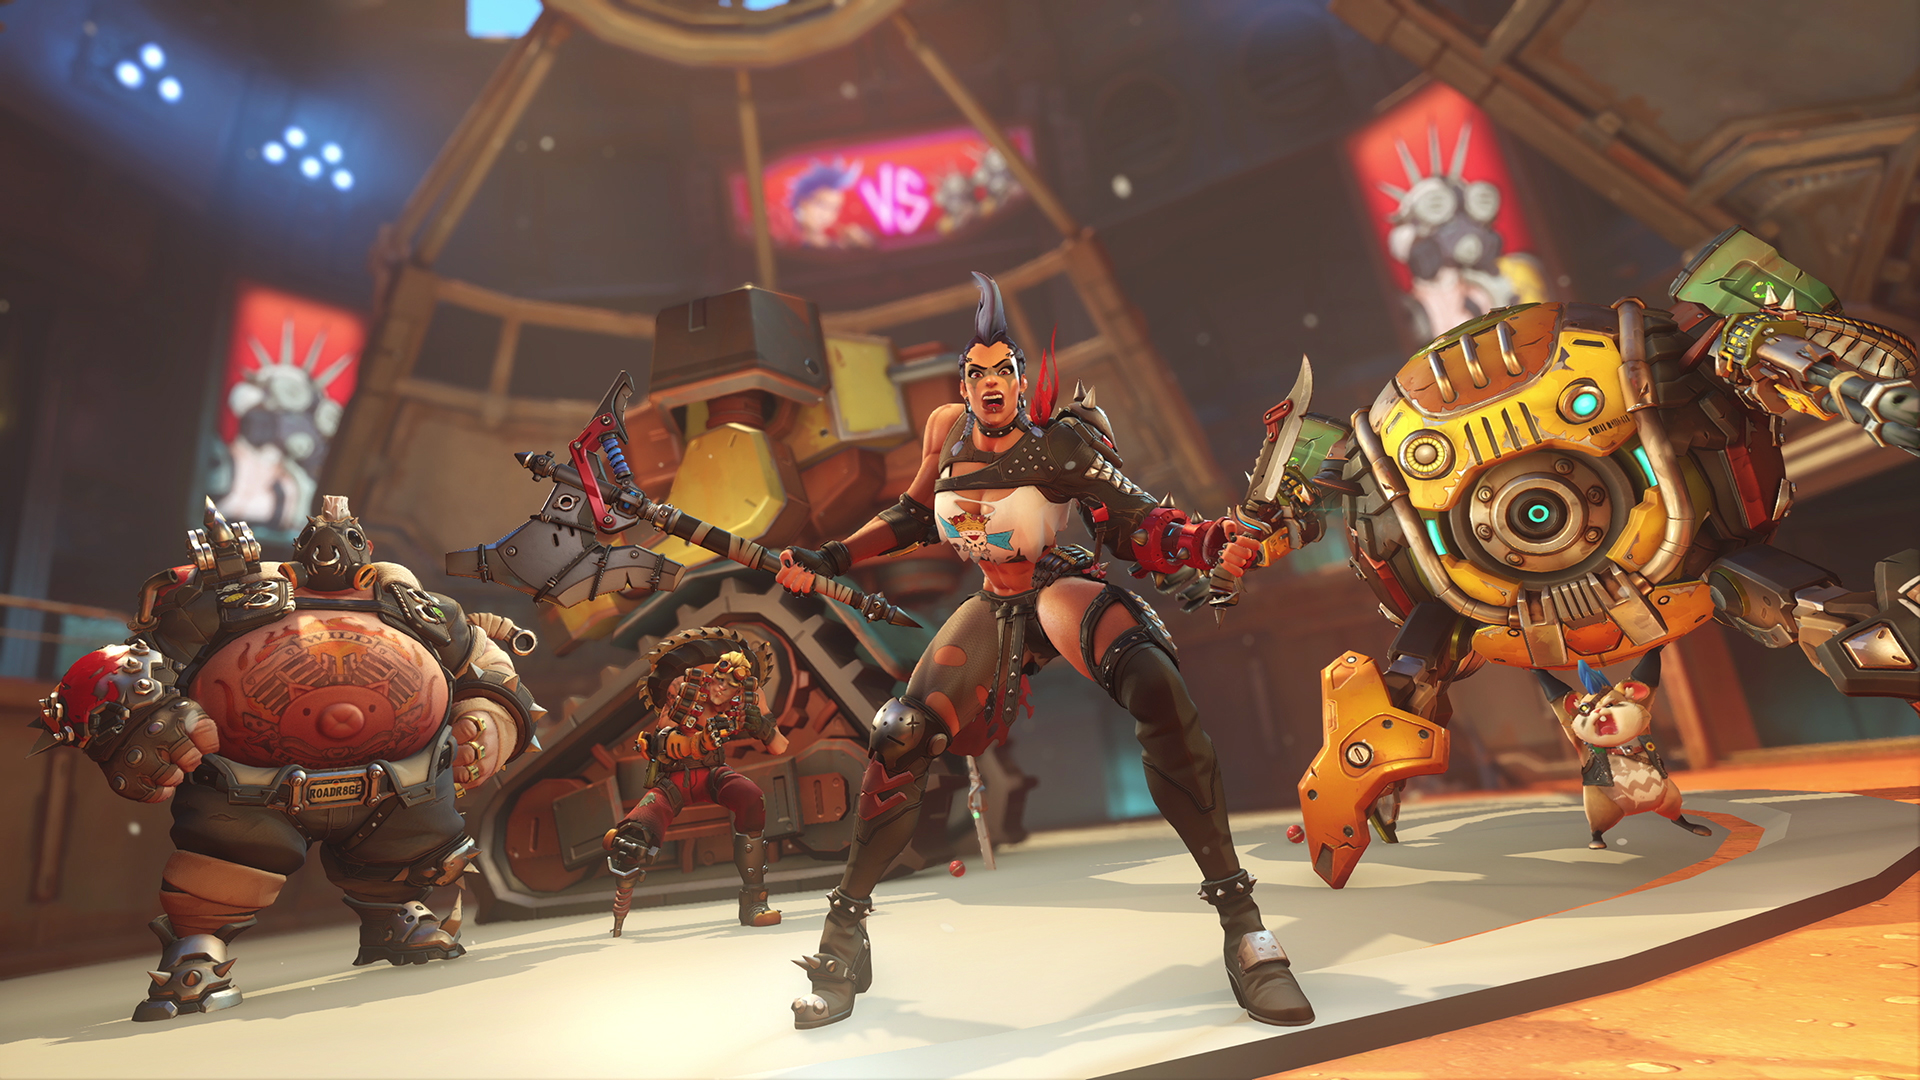 A New Threat to the World Begins in Overwatch 2: Invasion - Xbox Wire